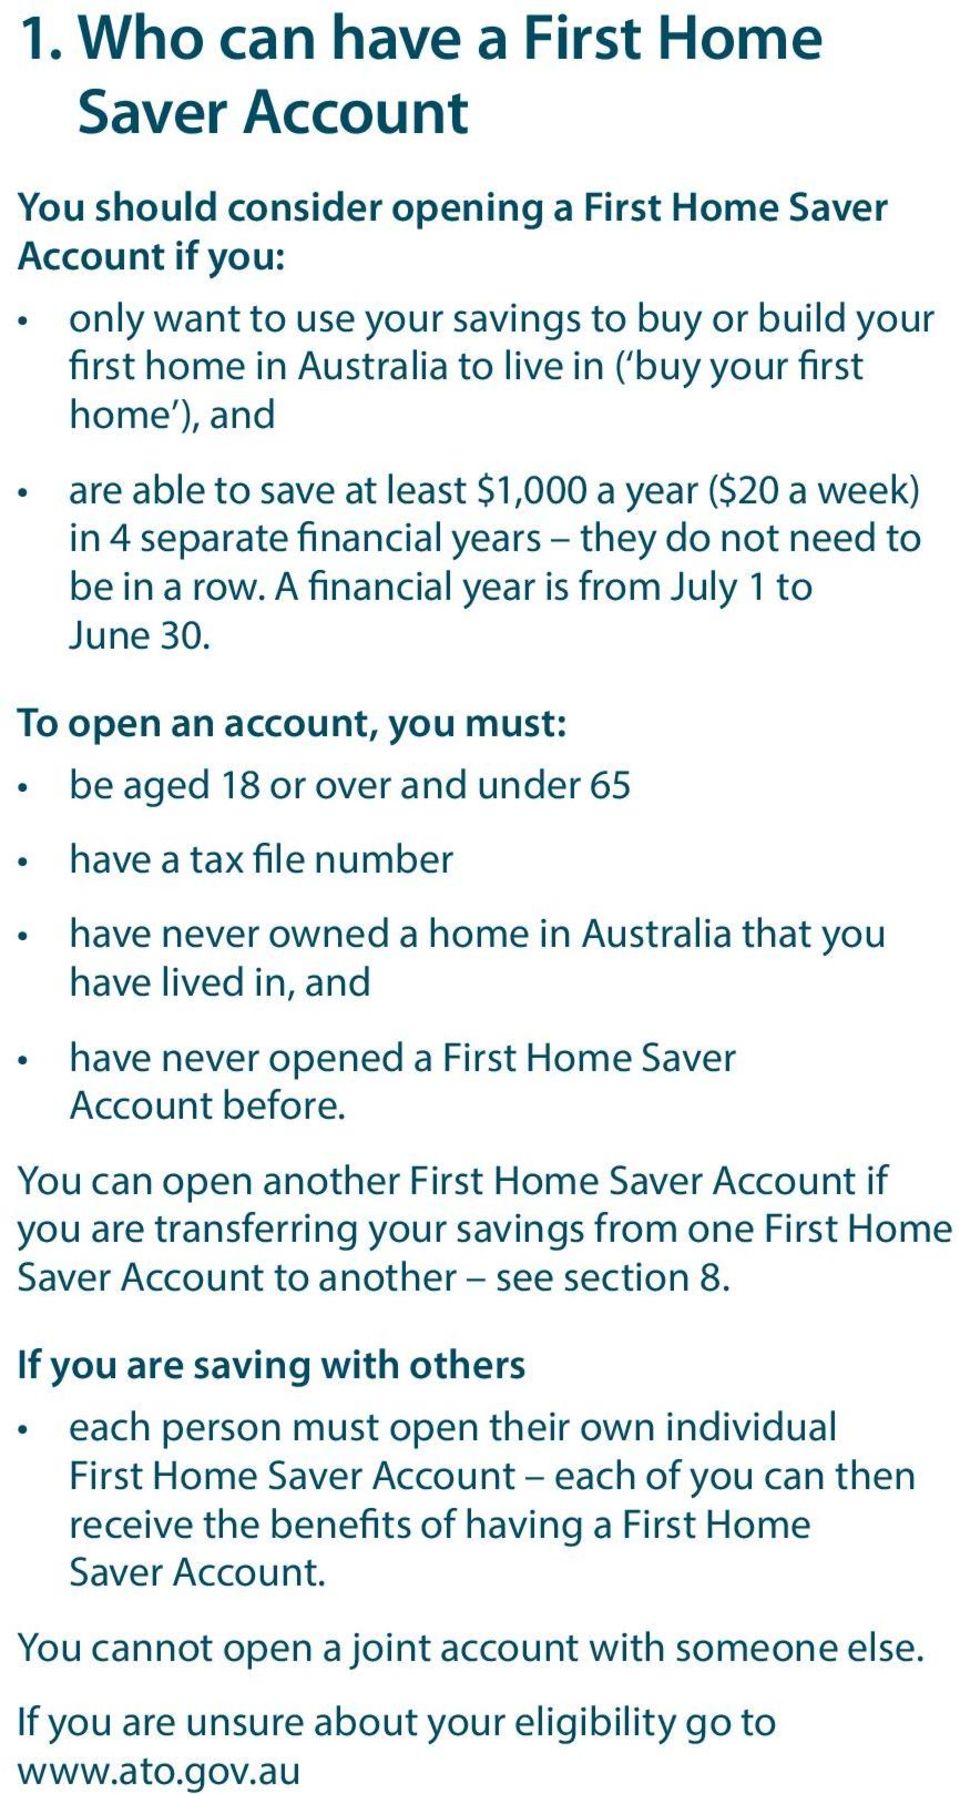 To open an account, you must: be aged 18 or over and under 65 have a tax file number have never owned a home in Australia that you have lived in, and have never opened a First Home Saver Account